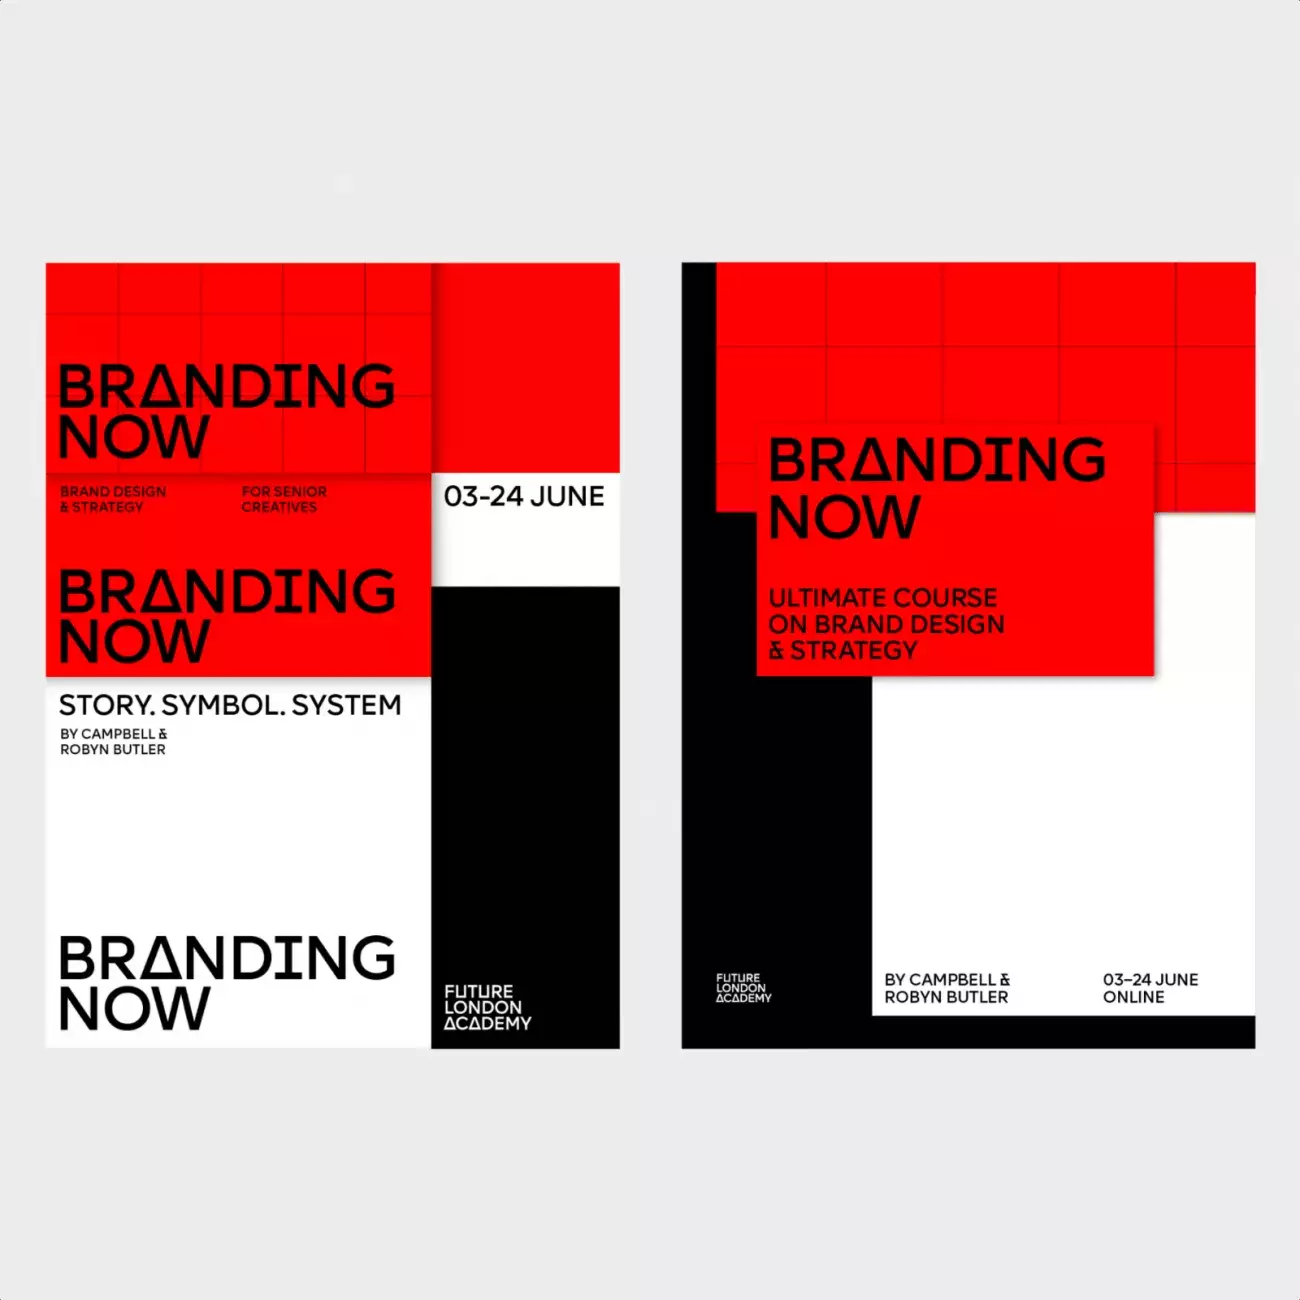 Future London Academy’s identity for Branding Now